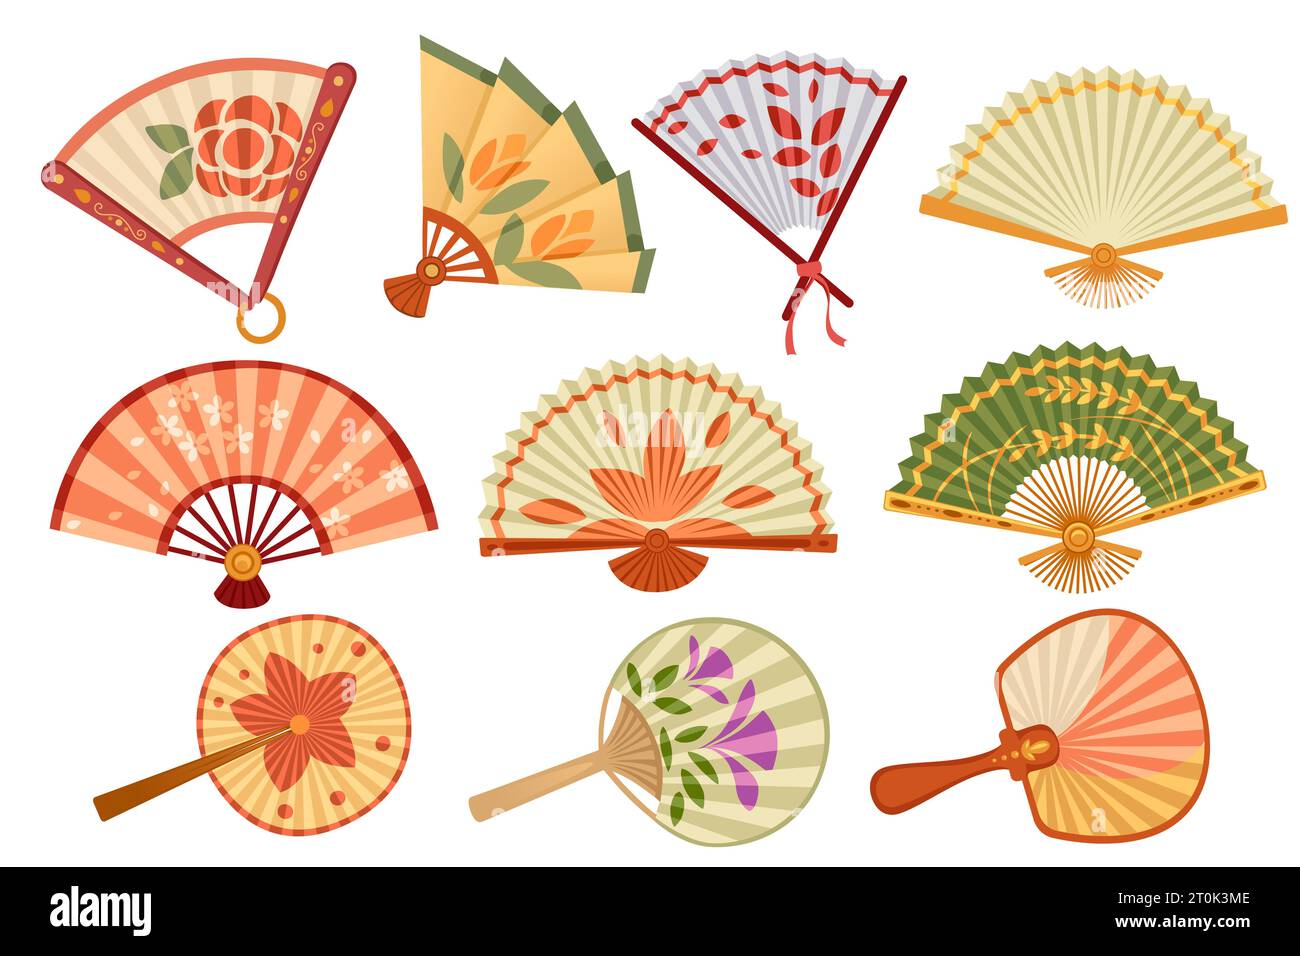 Set of classic asian style wooden hand fan with colorful drawing pattern vector illustration isolated on white background Stock Vector